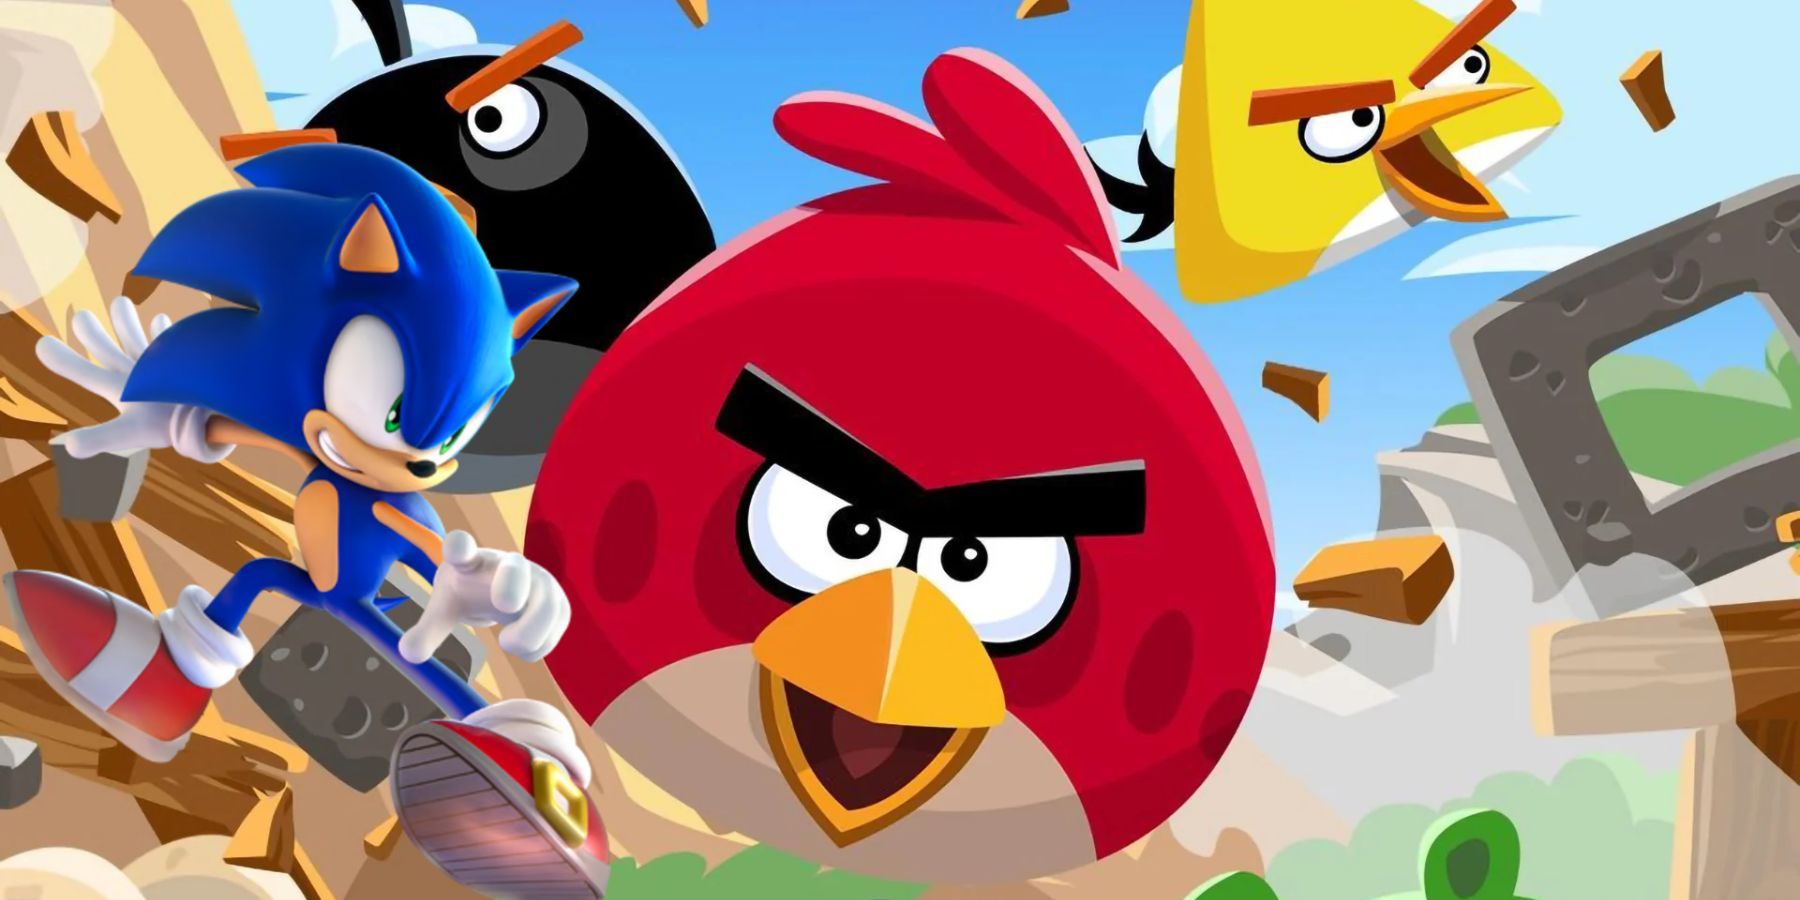 Sega Might Be Buying Angry Birds Maker for $1 Billion